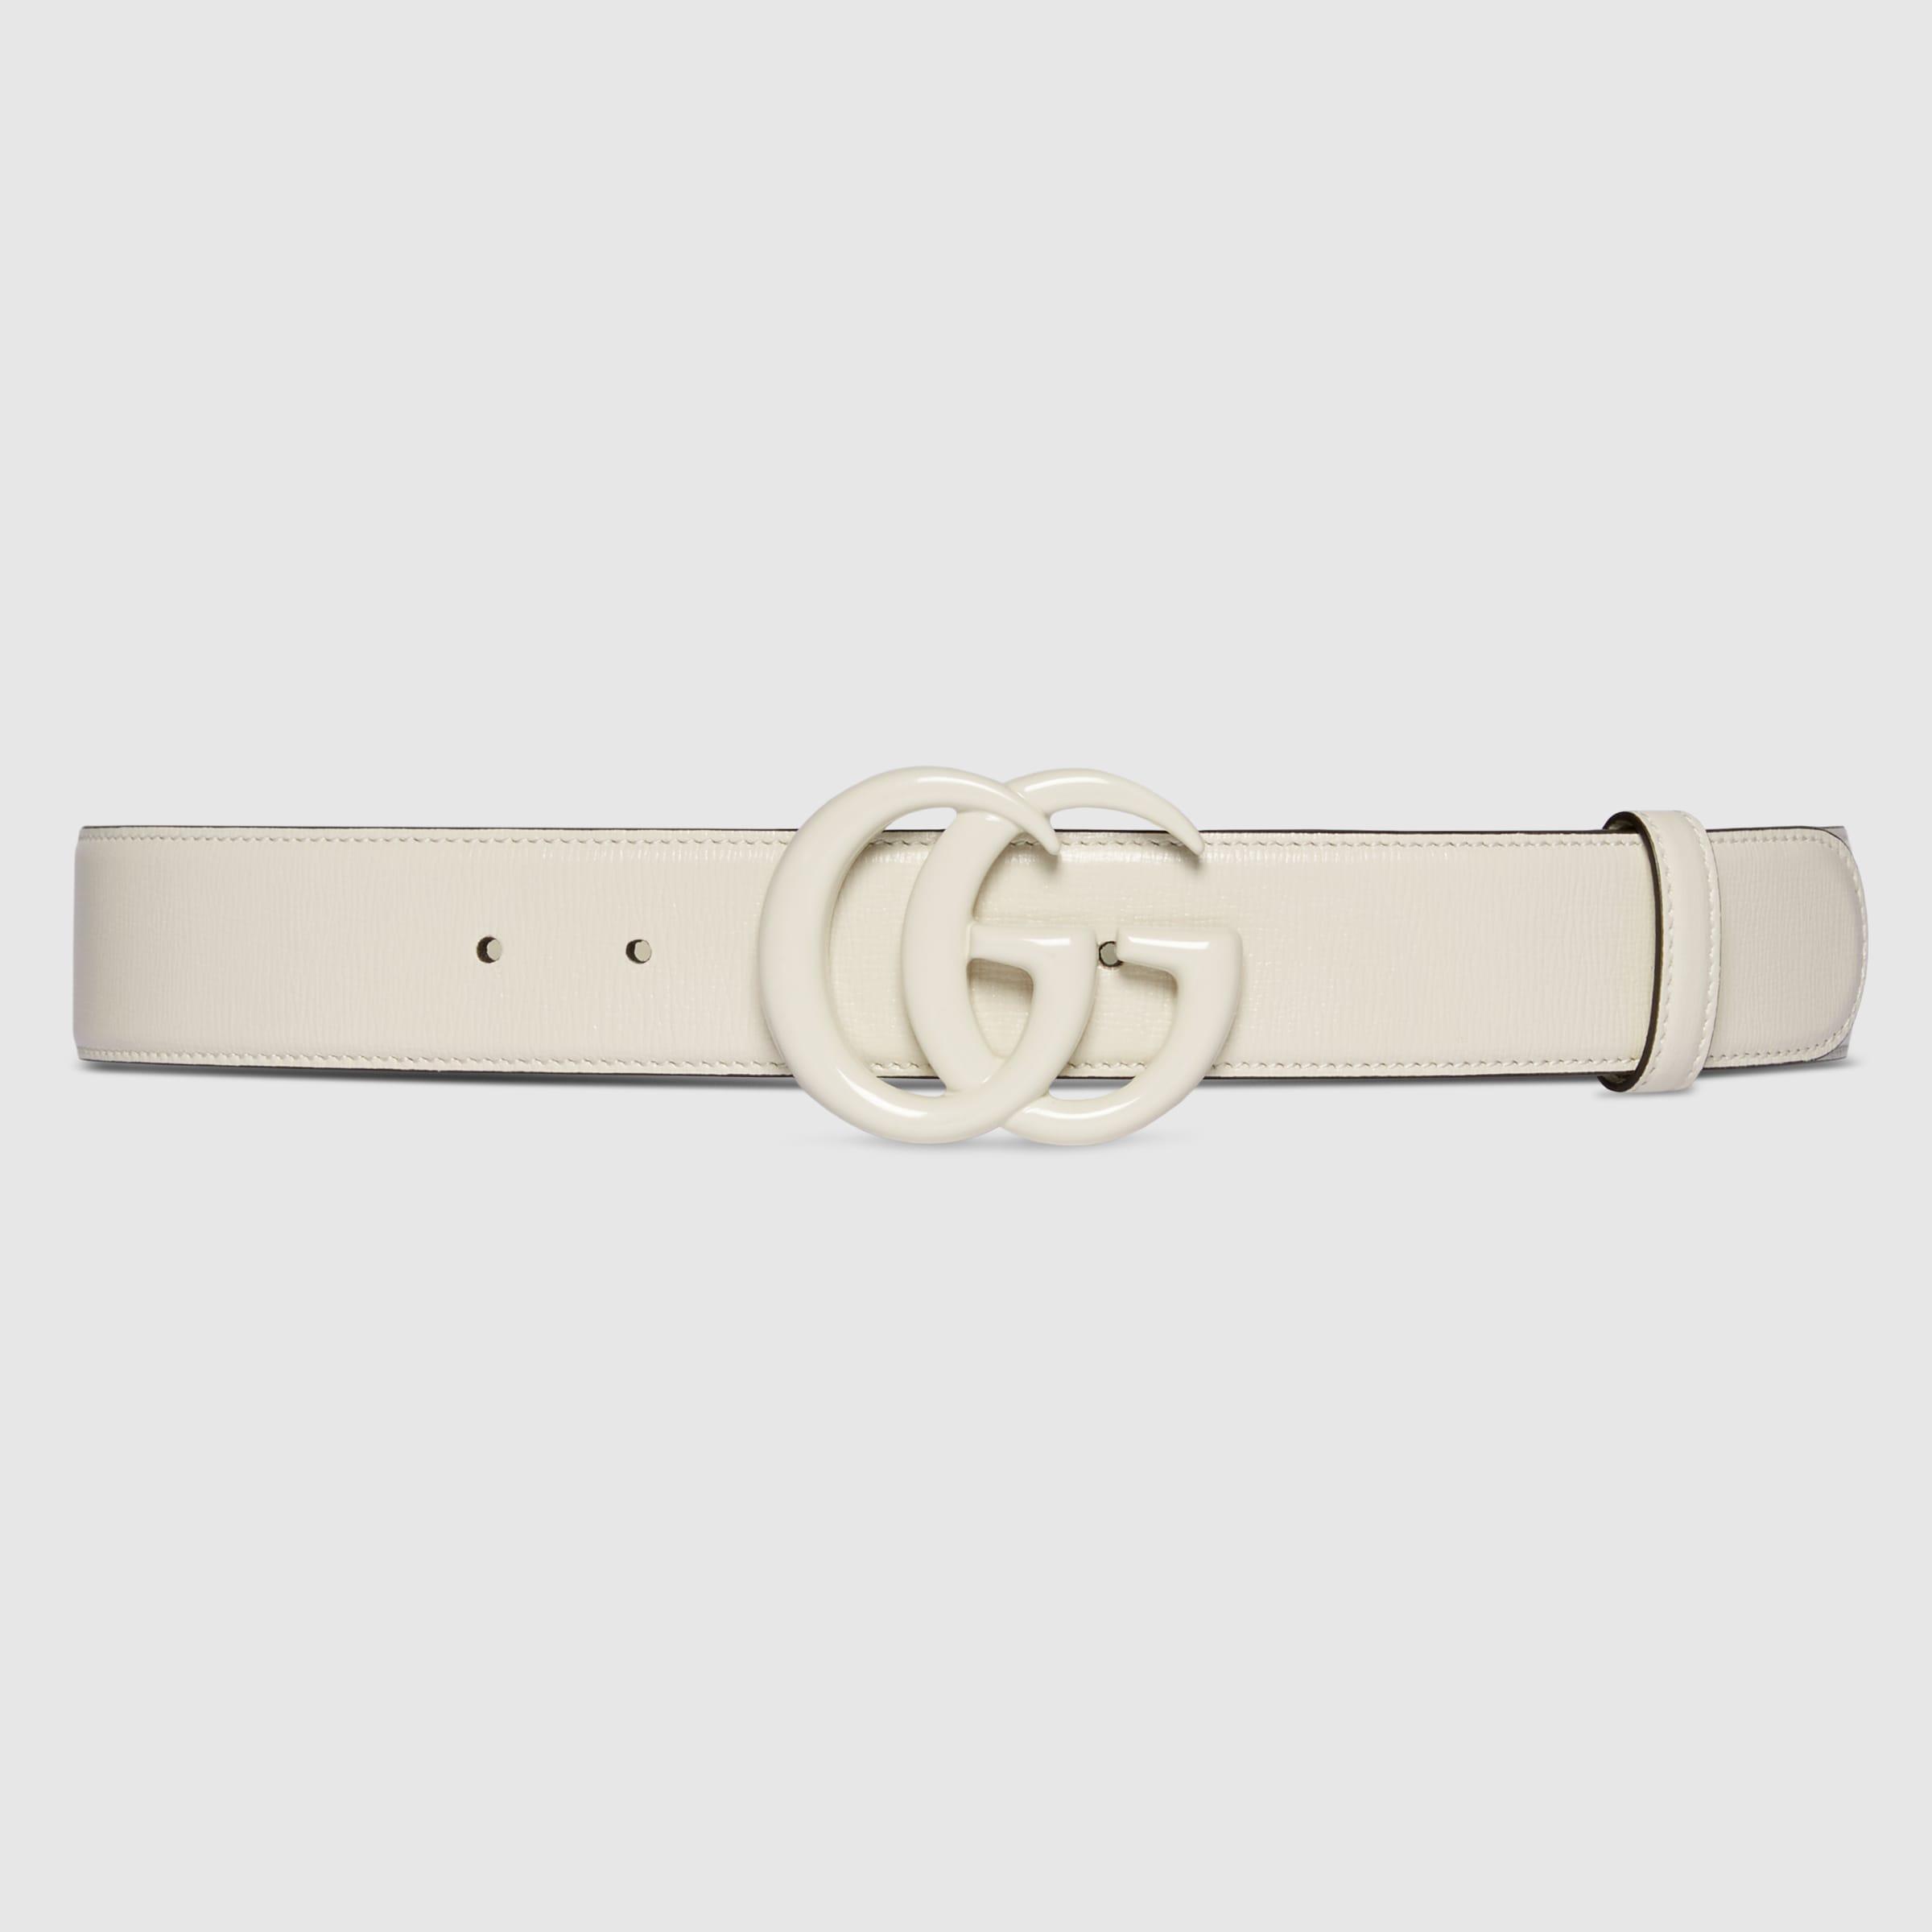 Gucci GG Marmont Jumbo GG Wide Belt in Brown